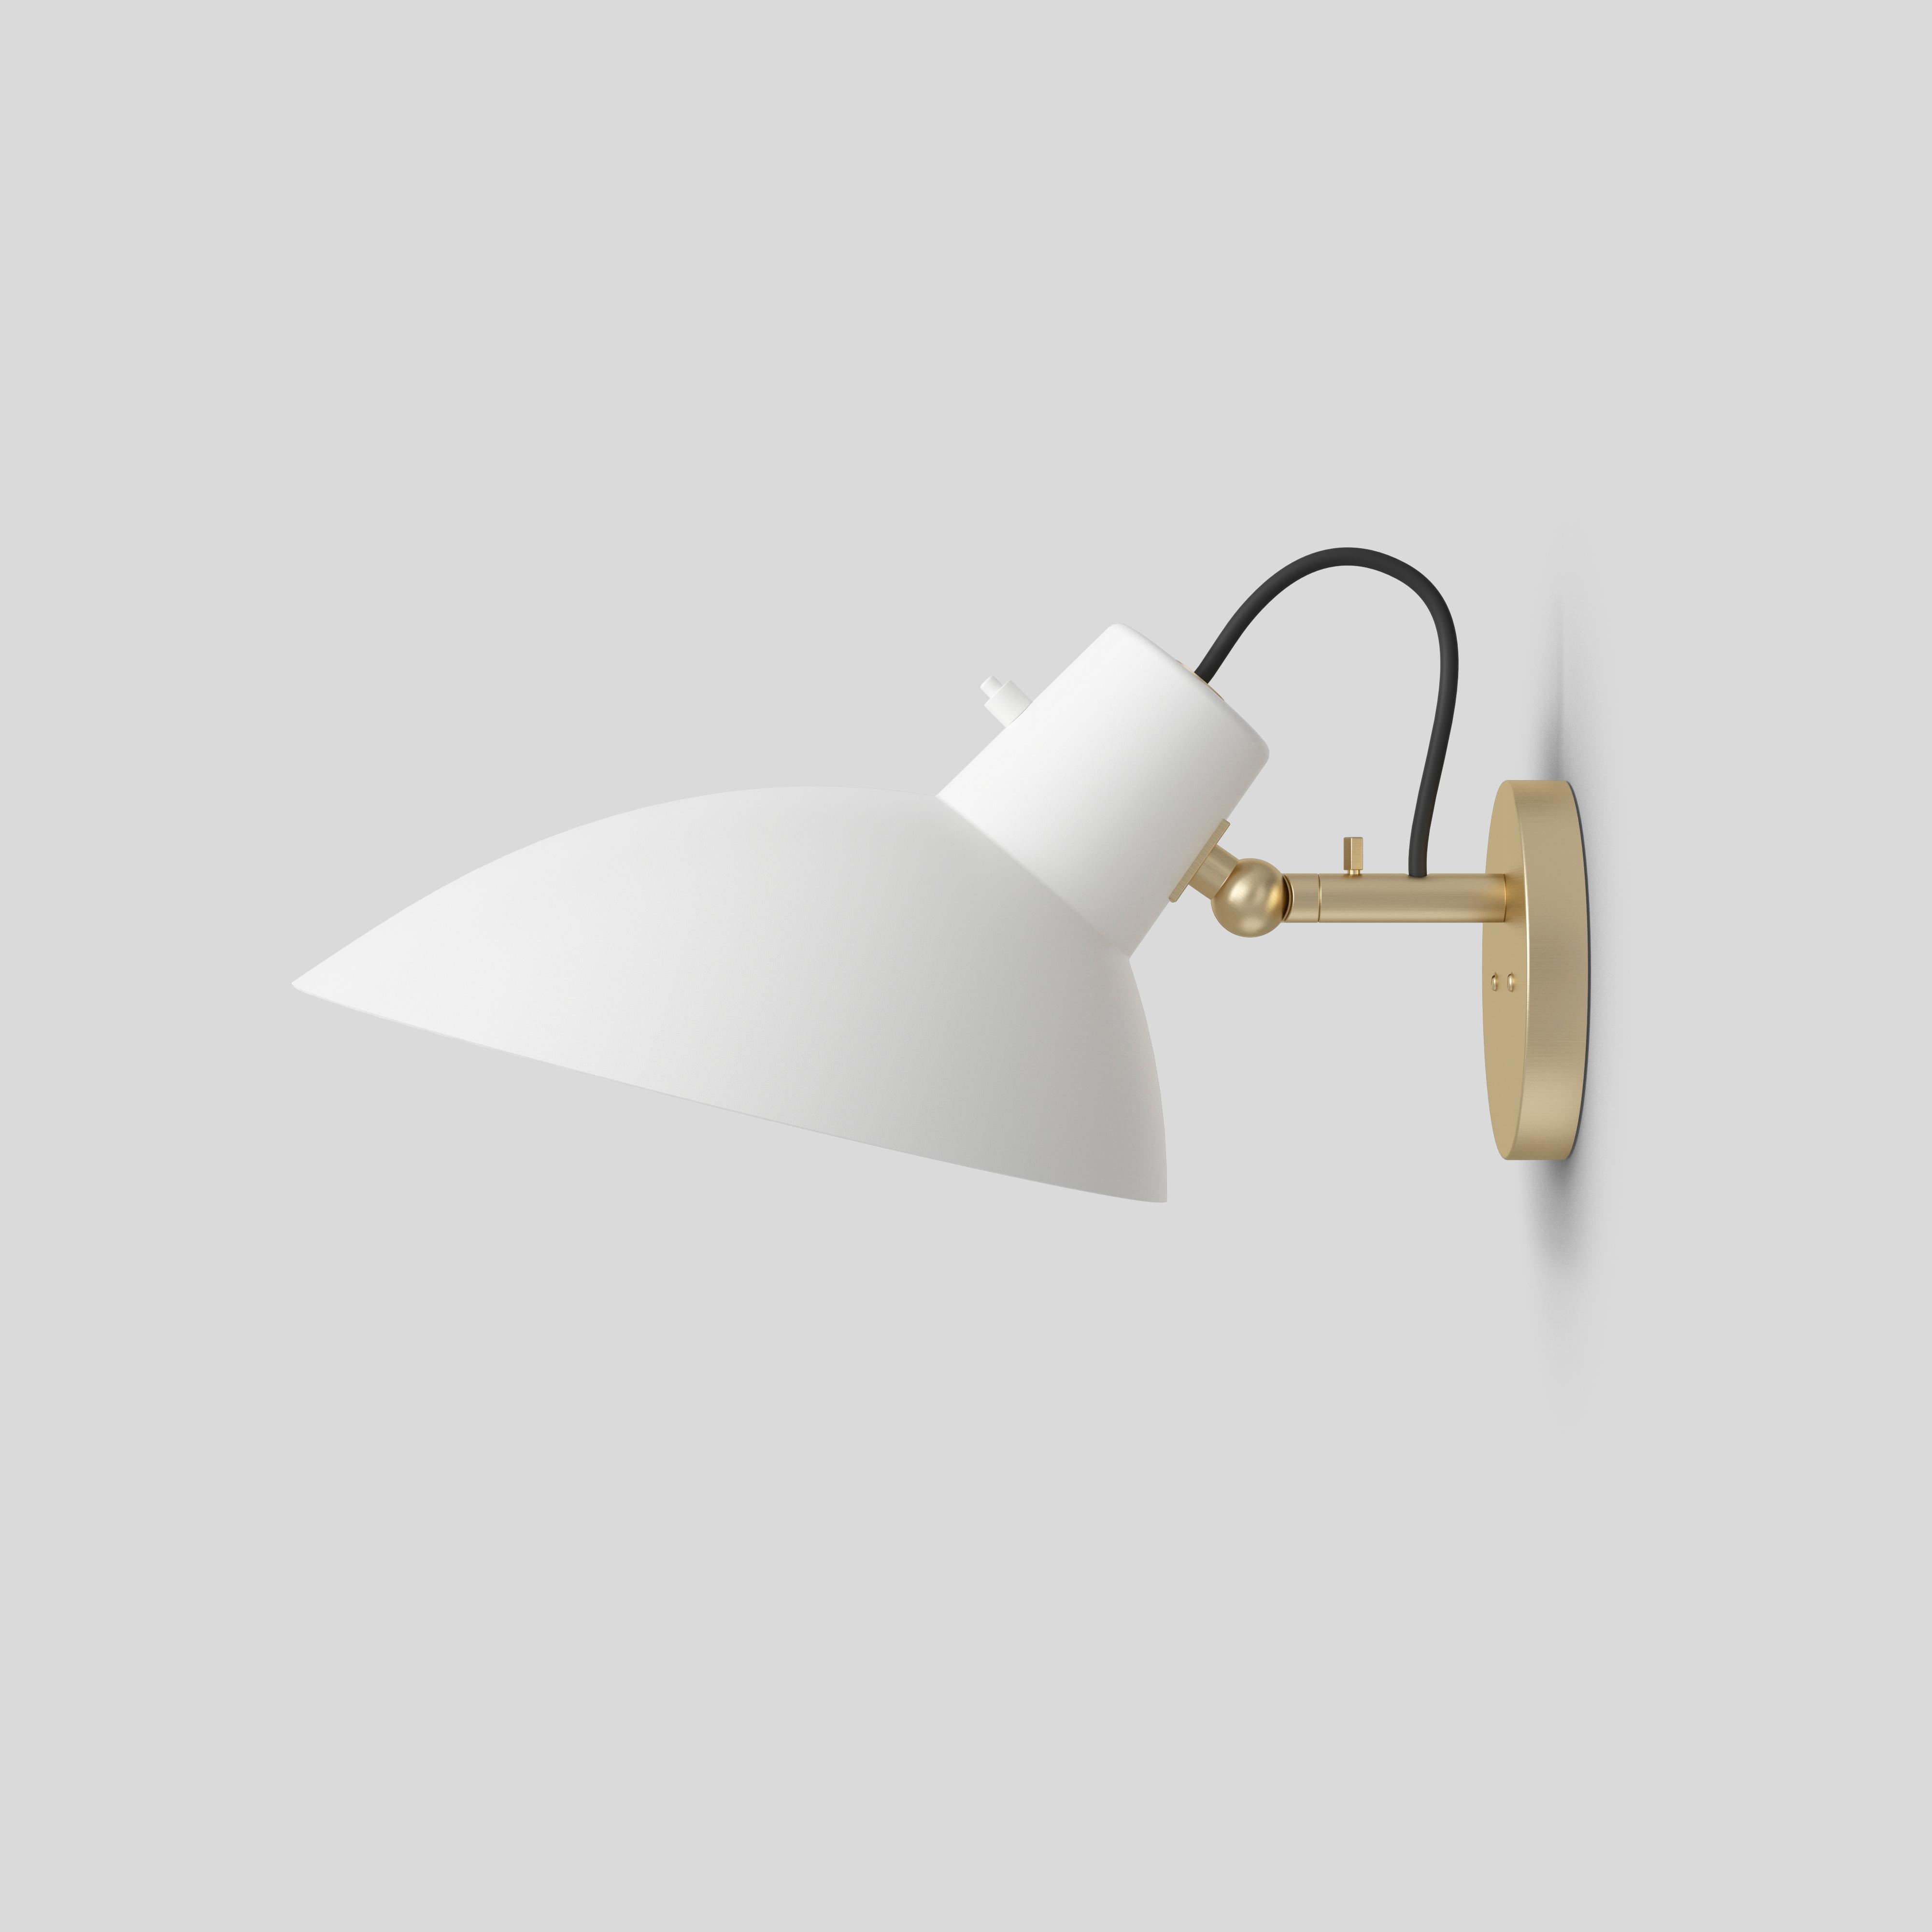 VV Cinquanta wall
Design by Vittoriano Viganò
This version is with white lacquered reflector and brass mount, Including Switch.

The VV Cinquanta features an elegant and versatile possible direct light source that can swivel and tilt. The Wall